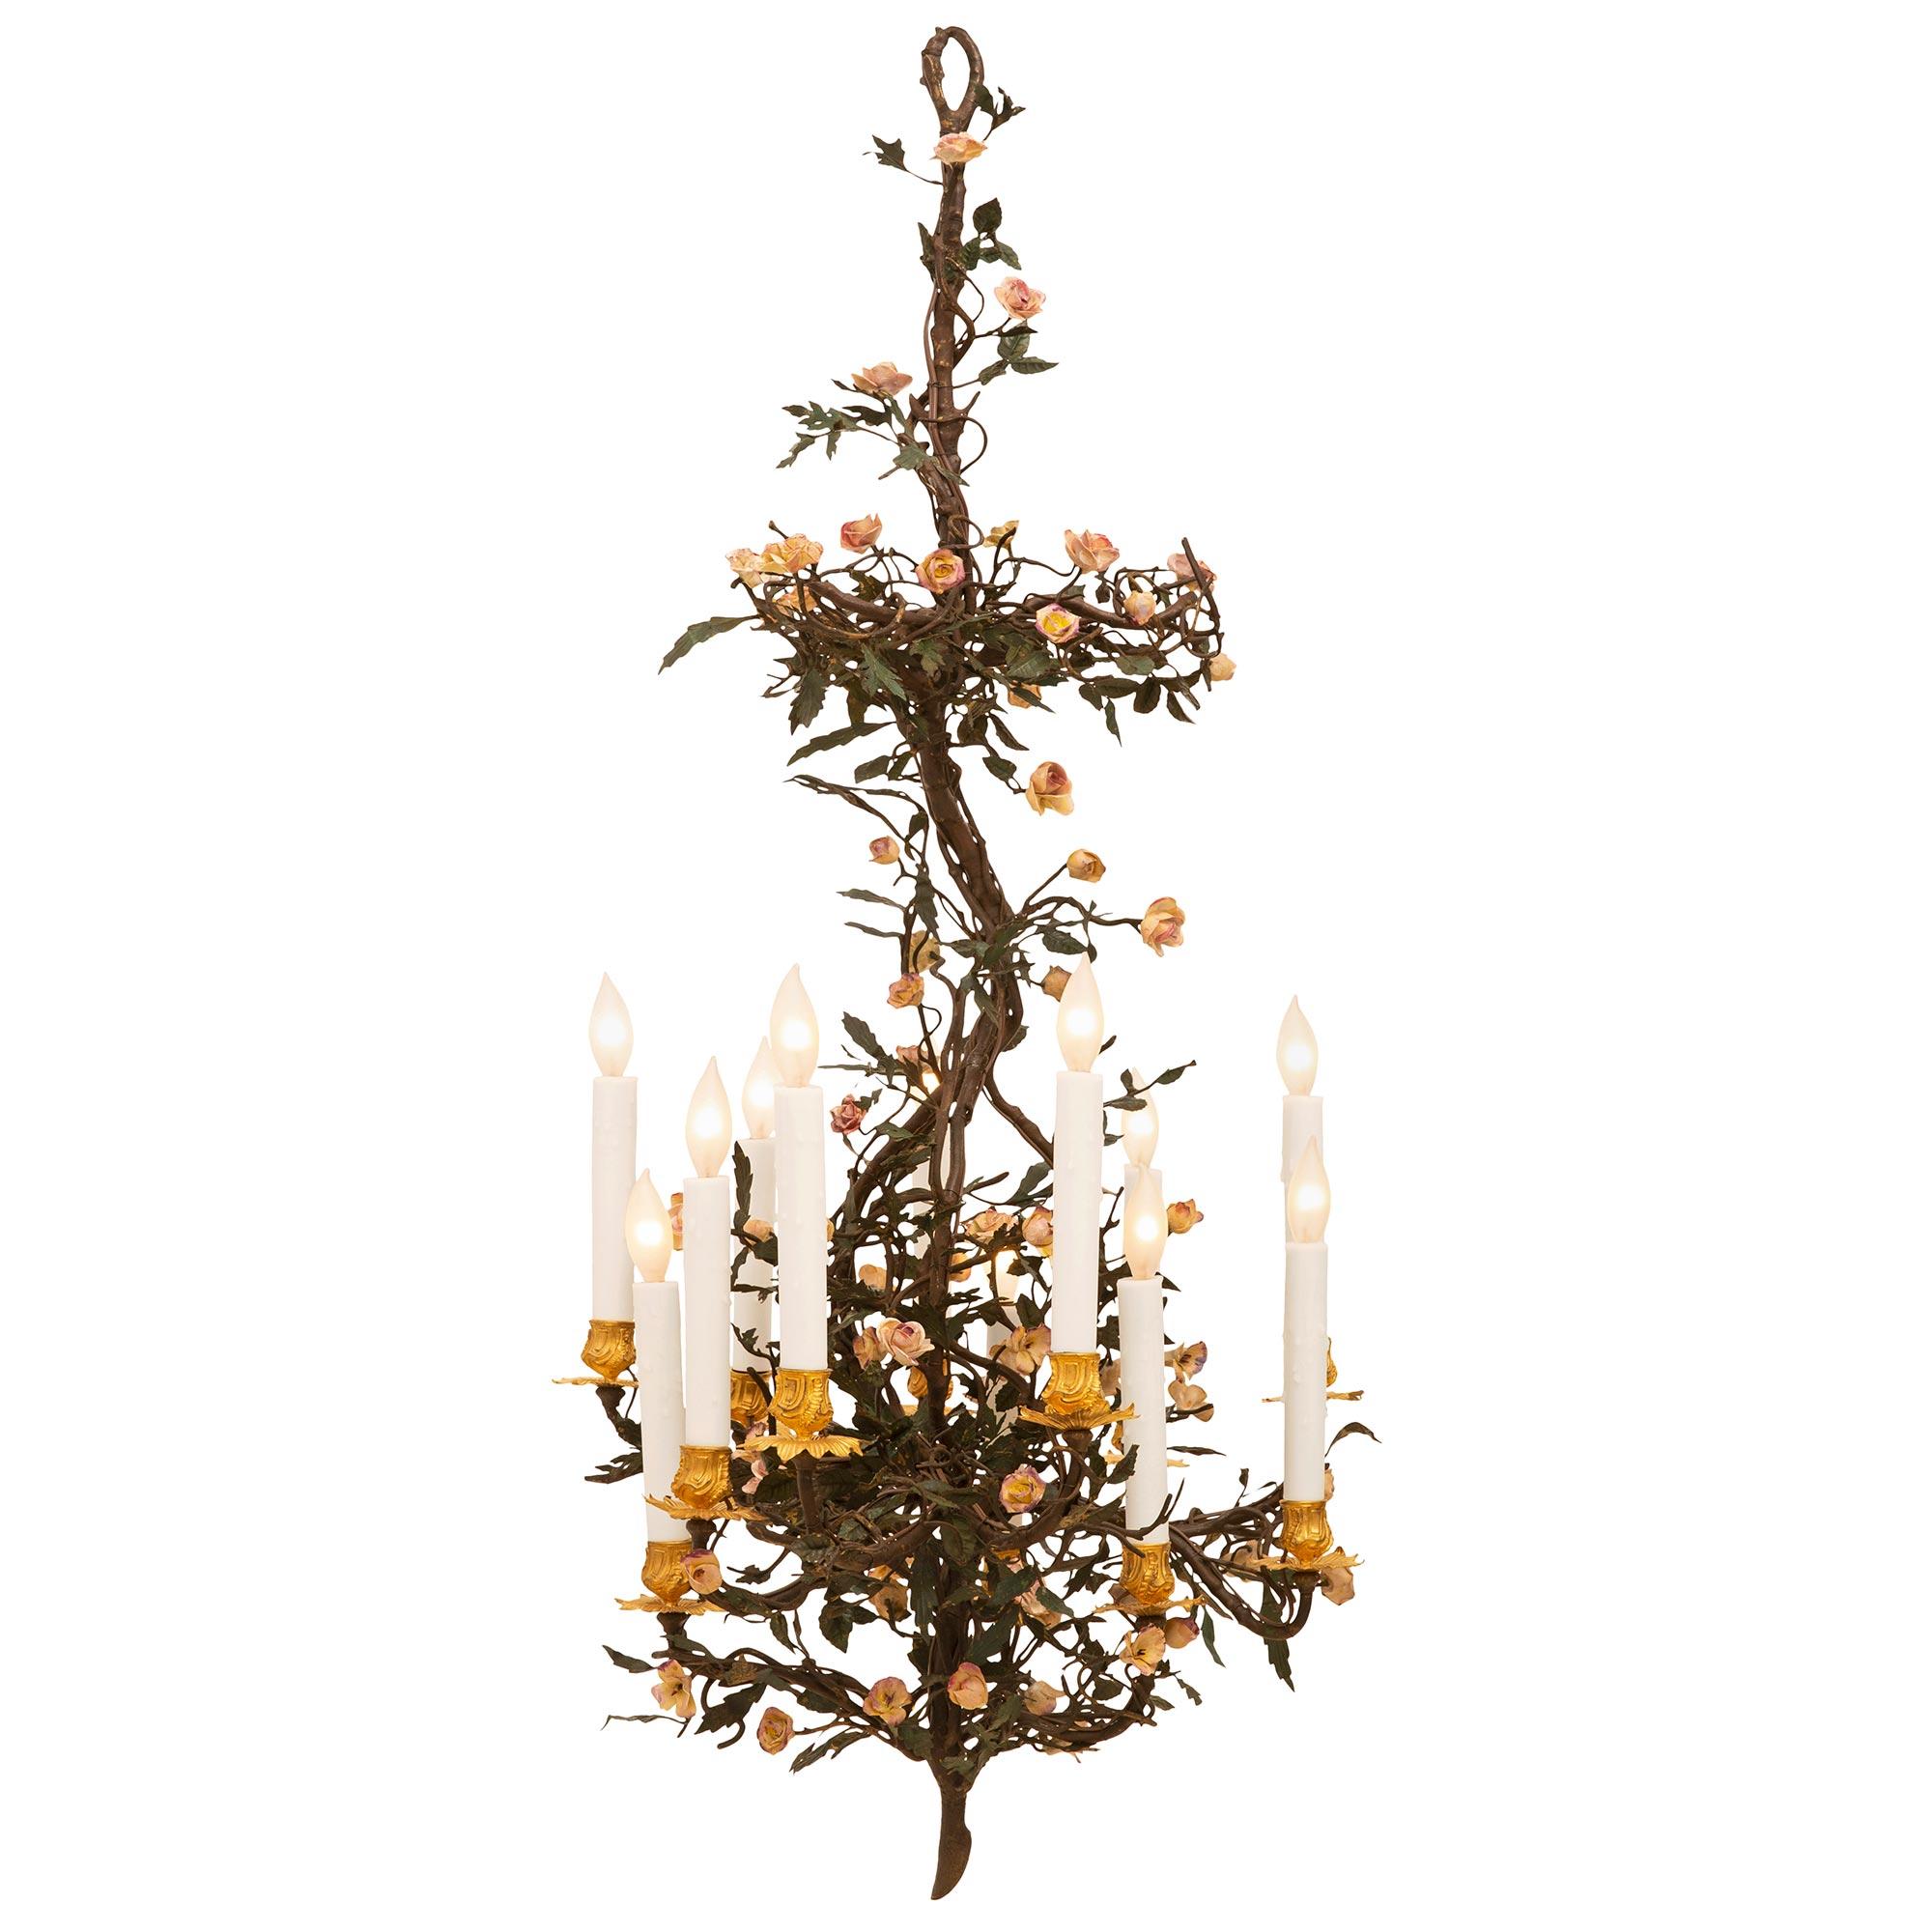 A lovely and unique Italian 19th-century porcelain and ormolu chandelier, from Turin. The twelve light chandelier displays impressive and extremely decorative metal branch-like movements throughout, and elegant hand-painted porcelain flowers. At the